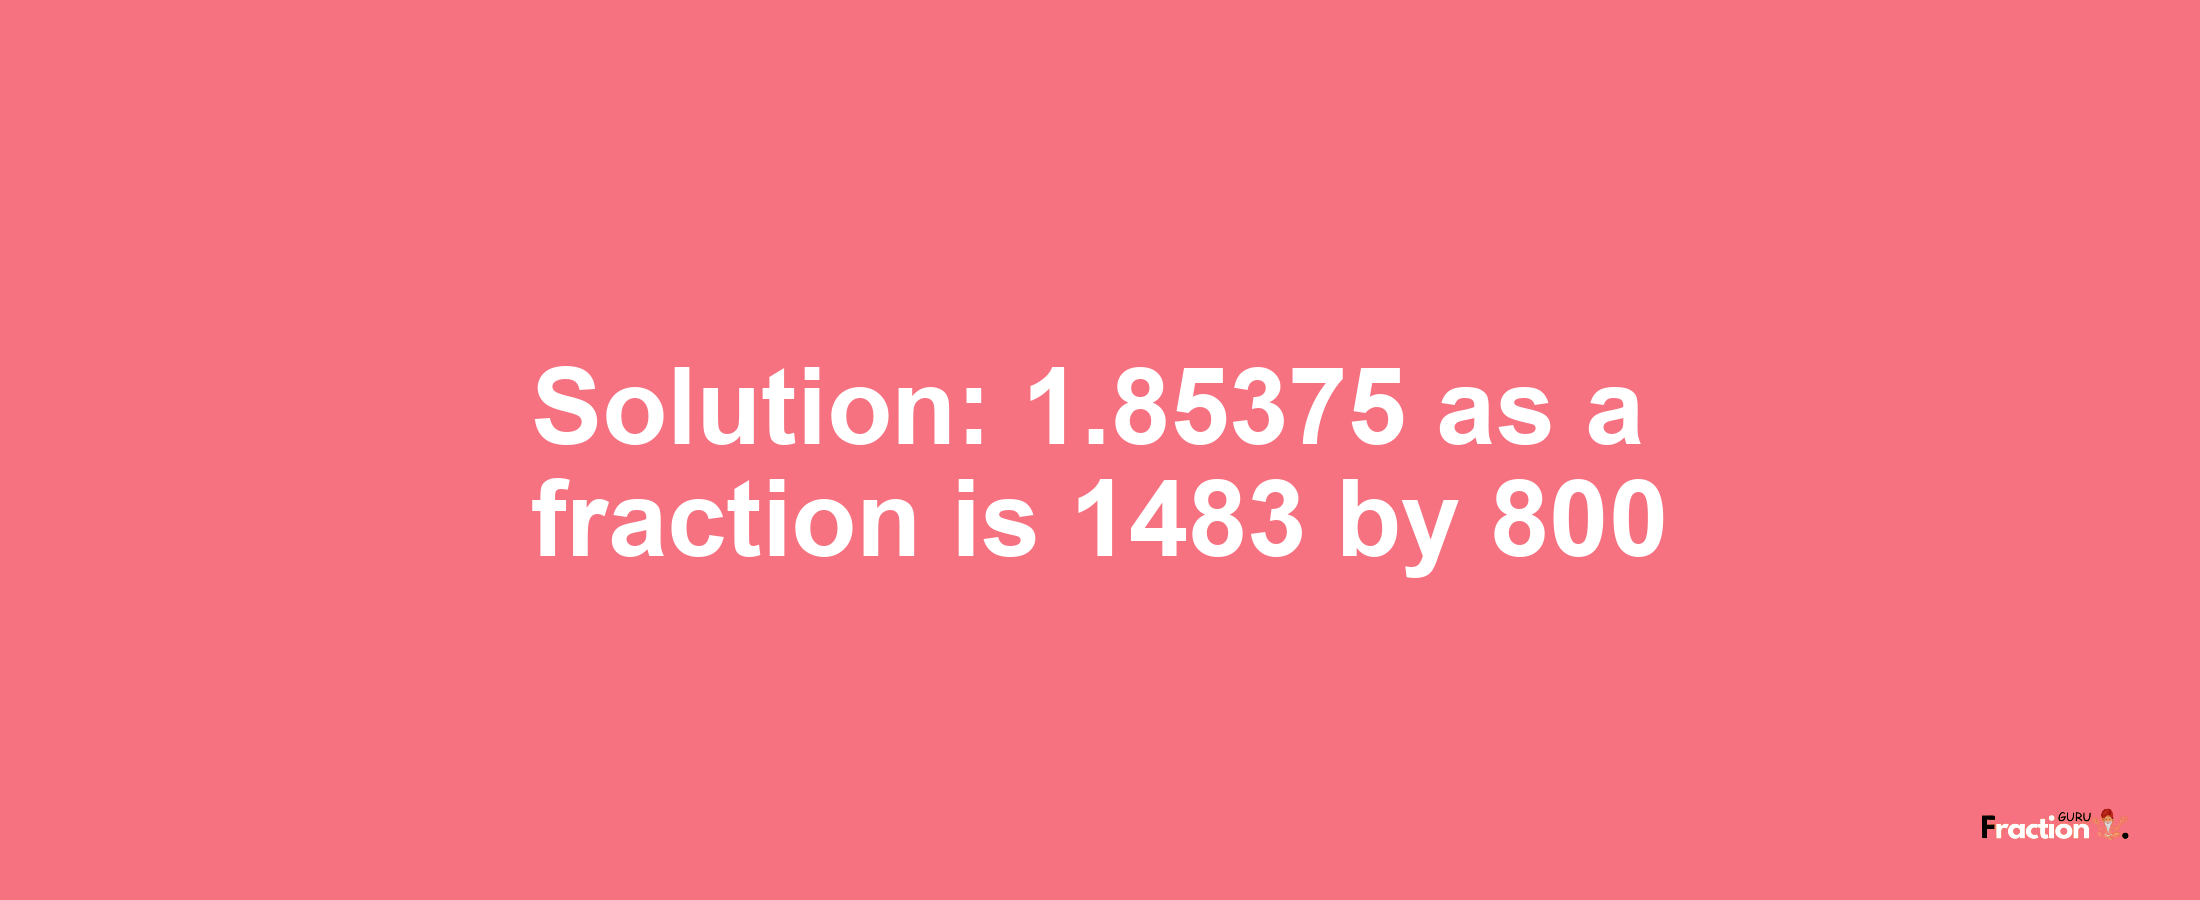 Solution:1.85375 as a fraction is 1483/800